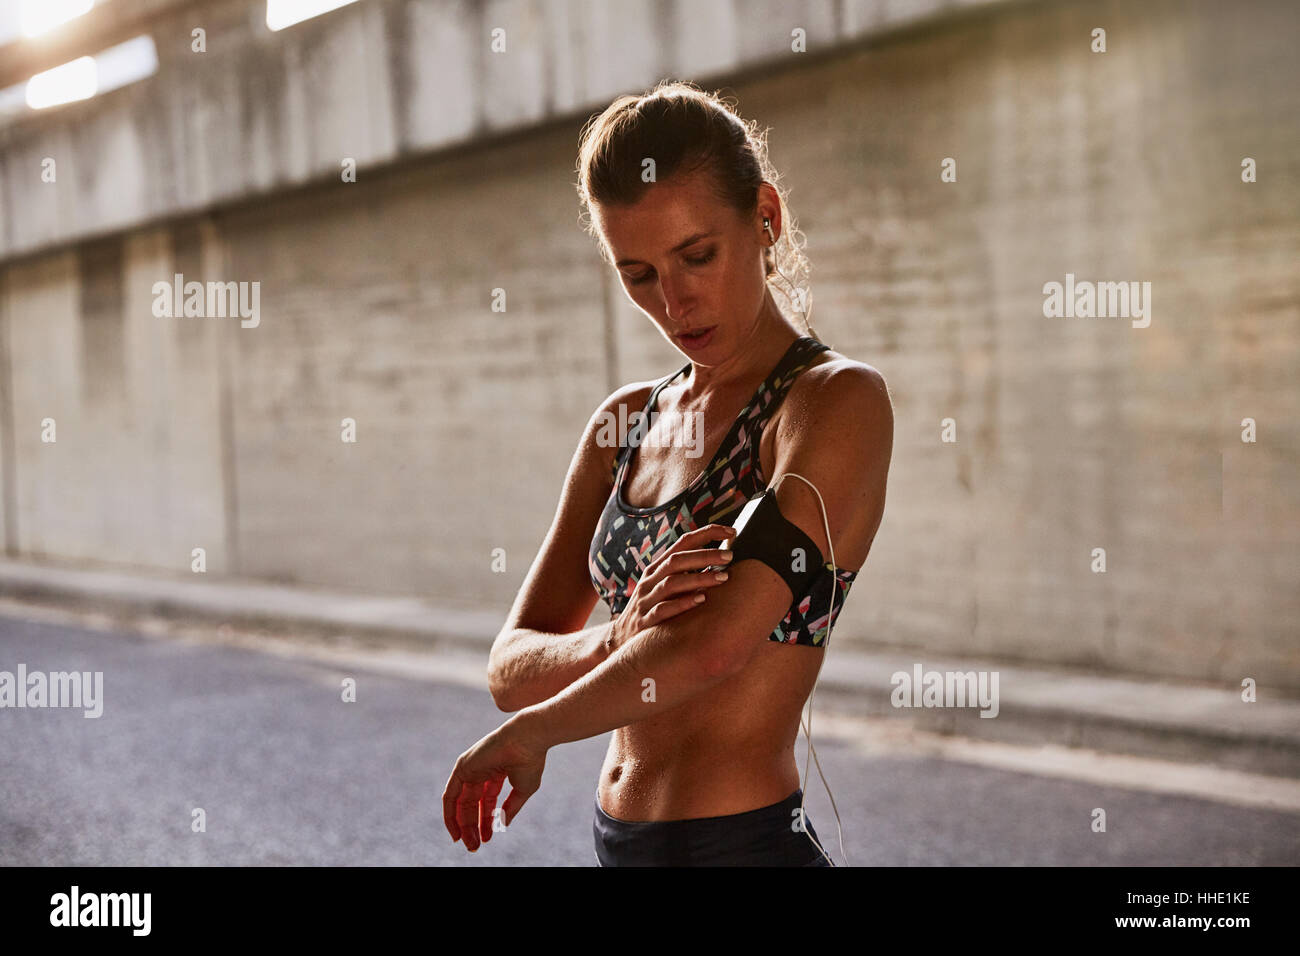 Fit female runner in sports bra using mp3 player arm band and headphones on urban street Stock Photo